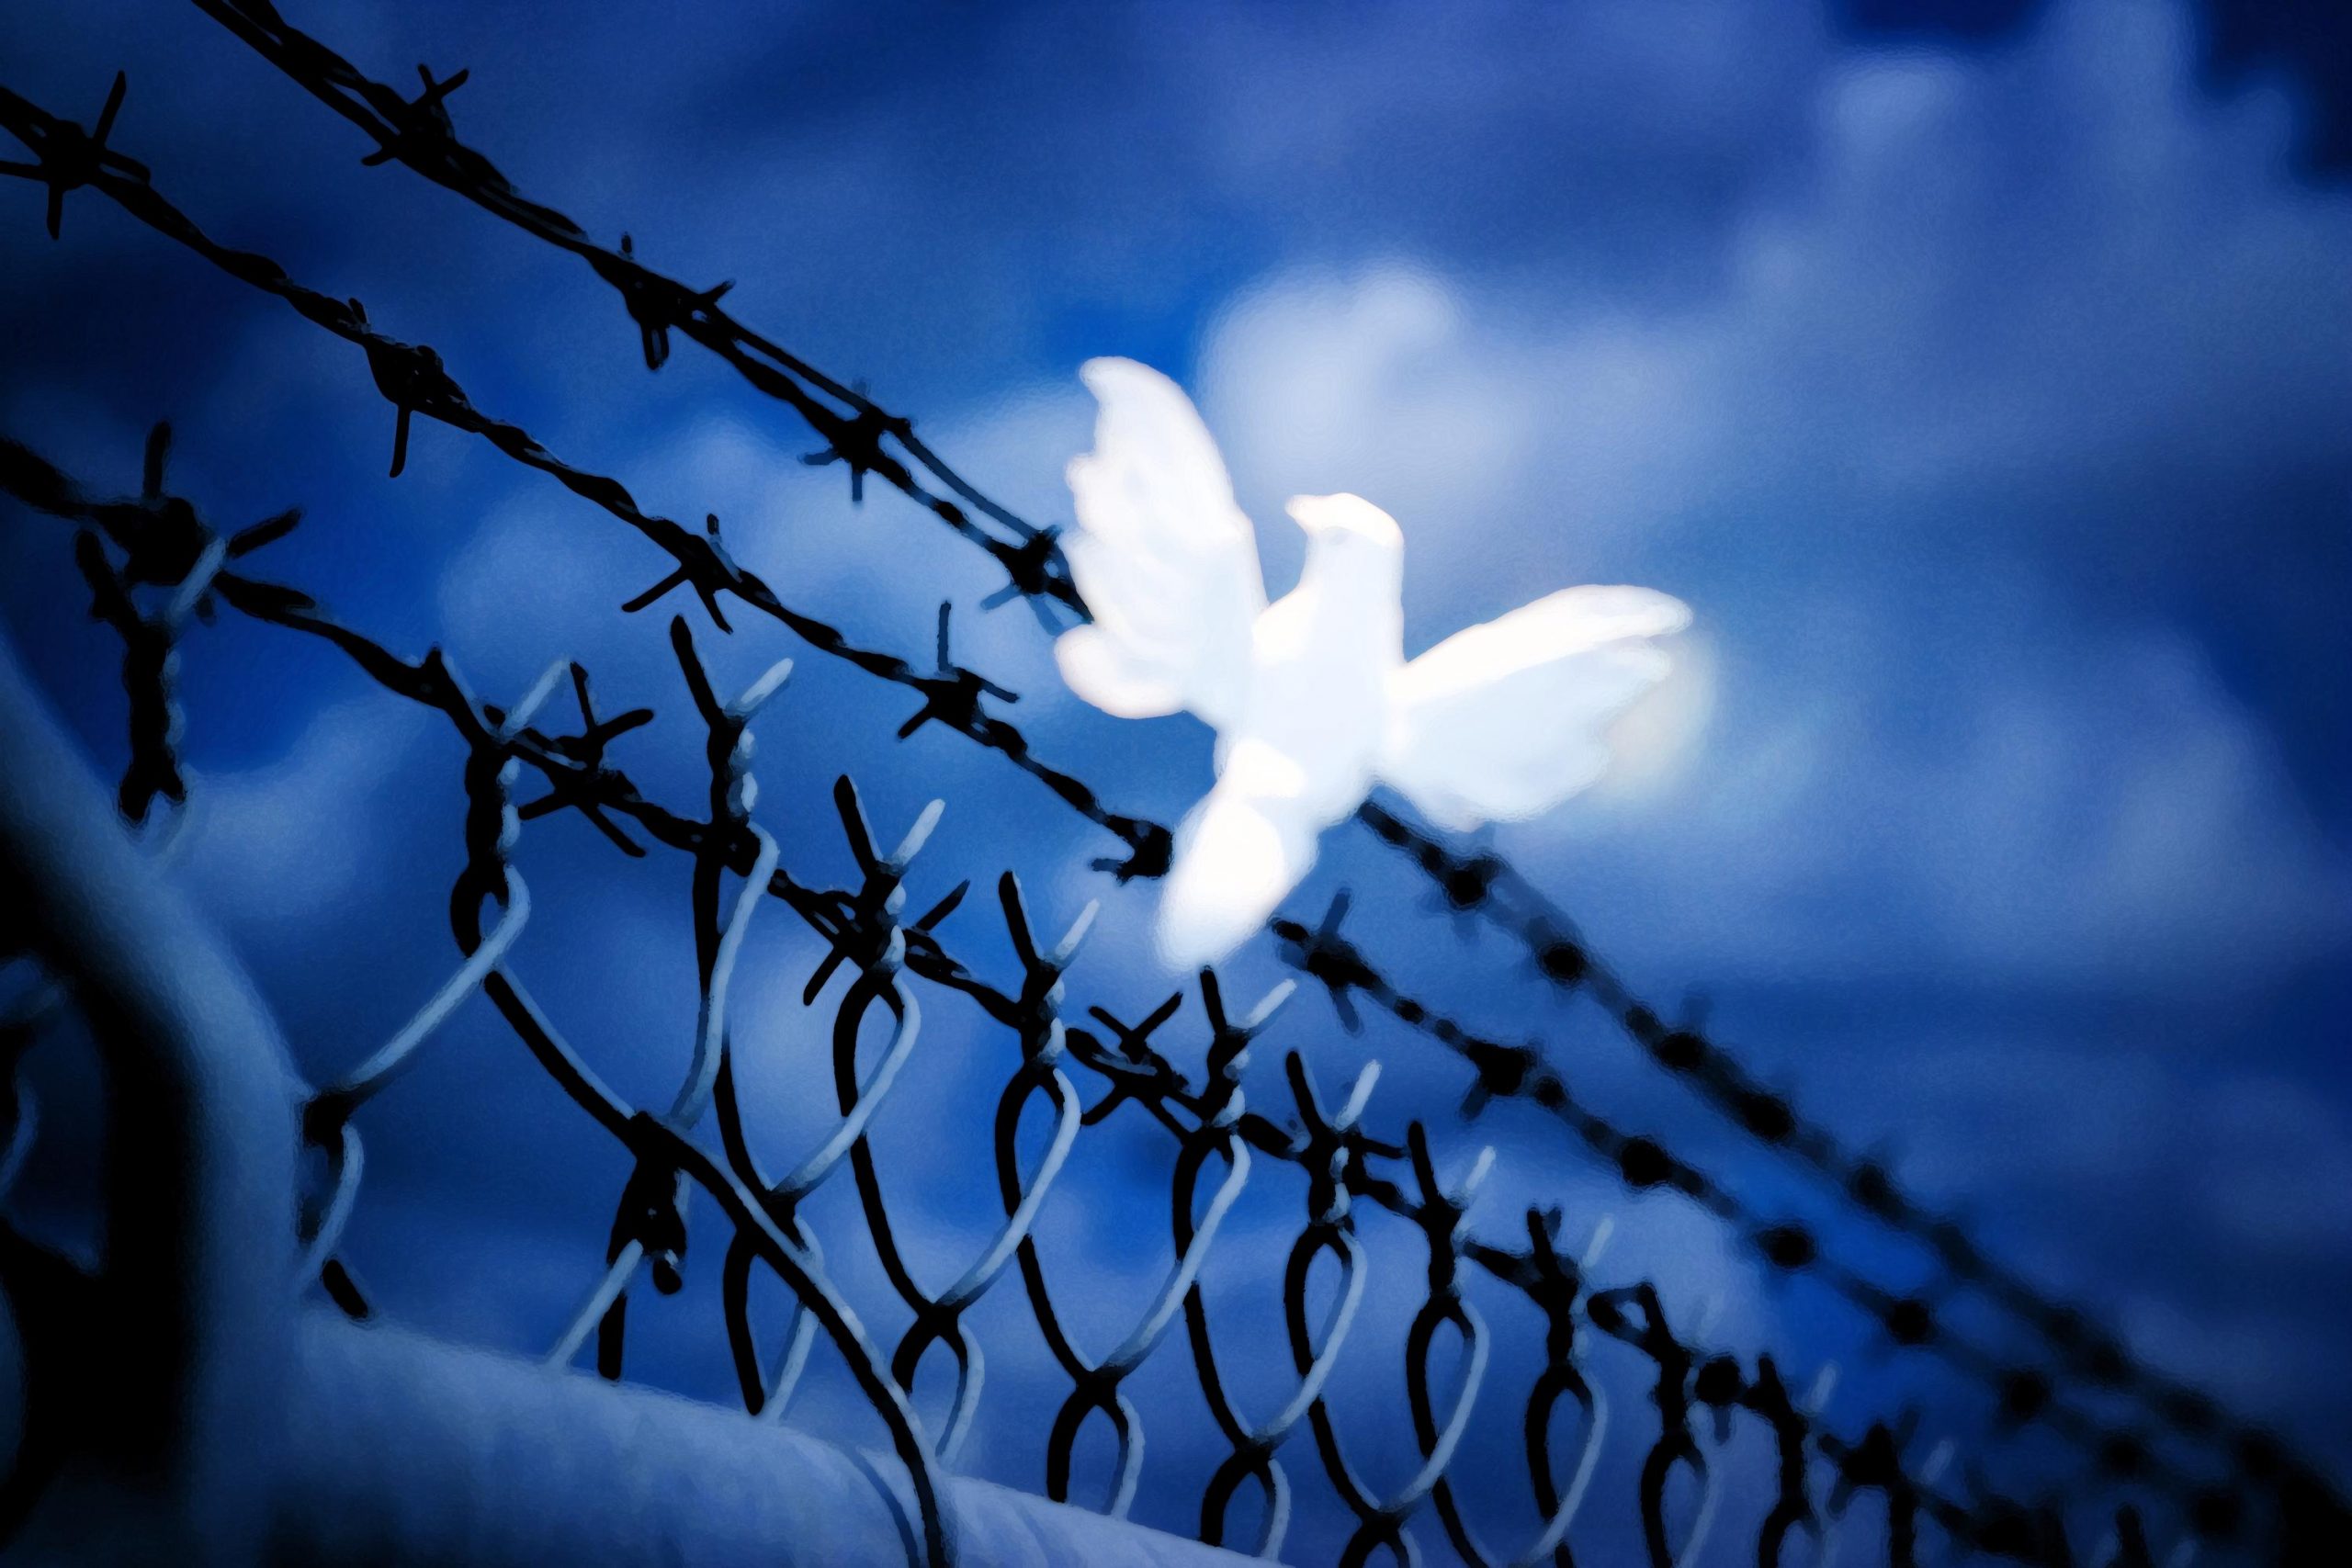 White bird sitting on barbed wire fence